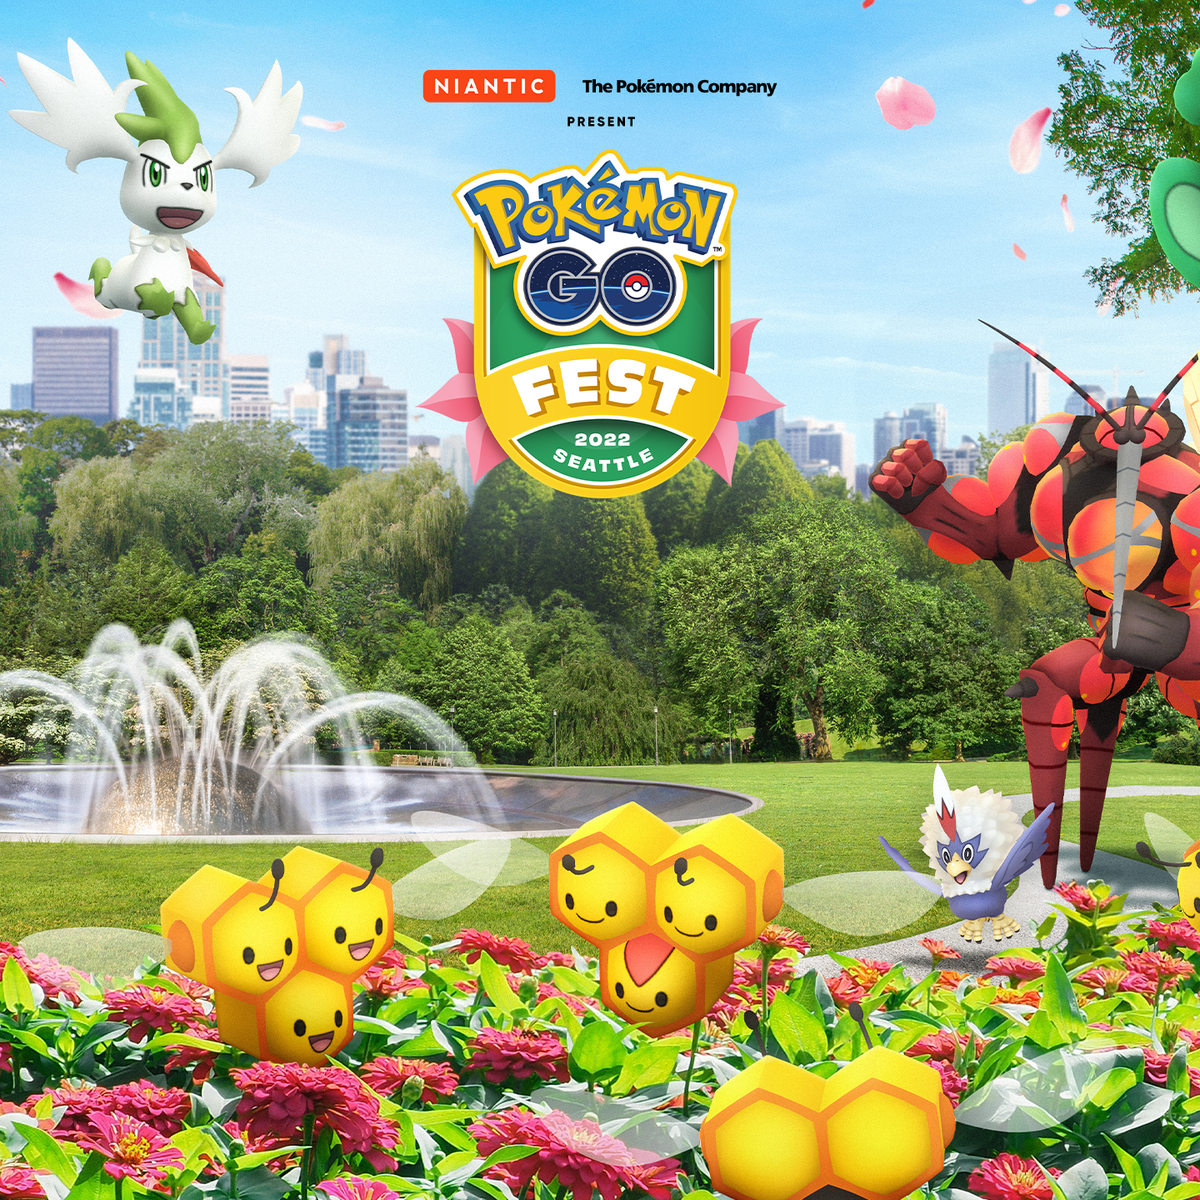 Pokémon Go adding more Ultra Beasts at Go Fest events - Polygon